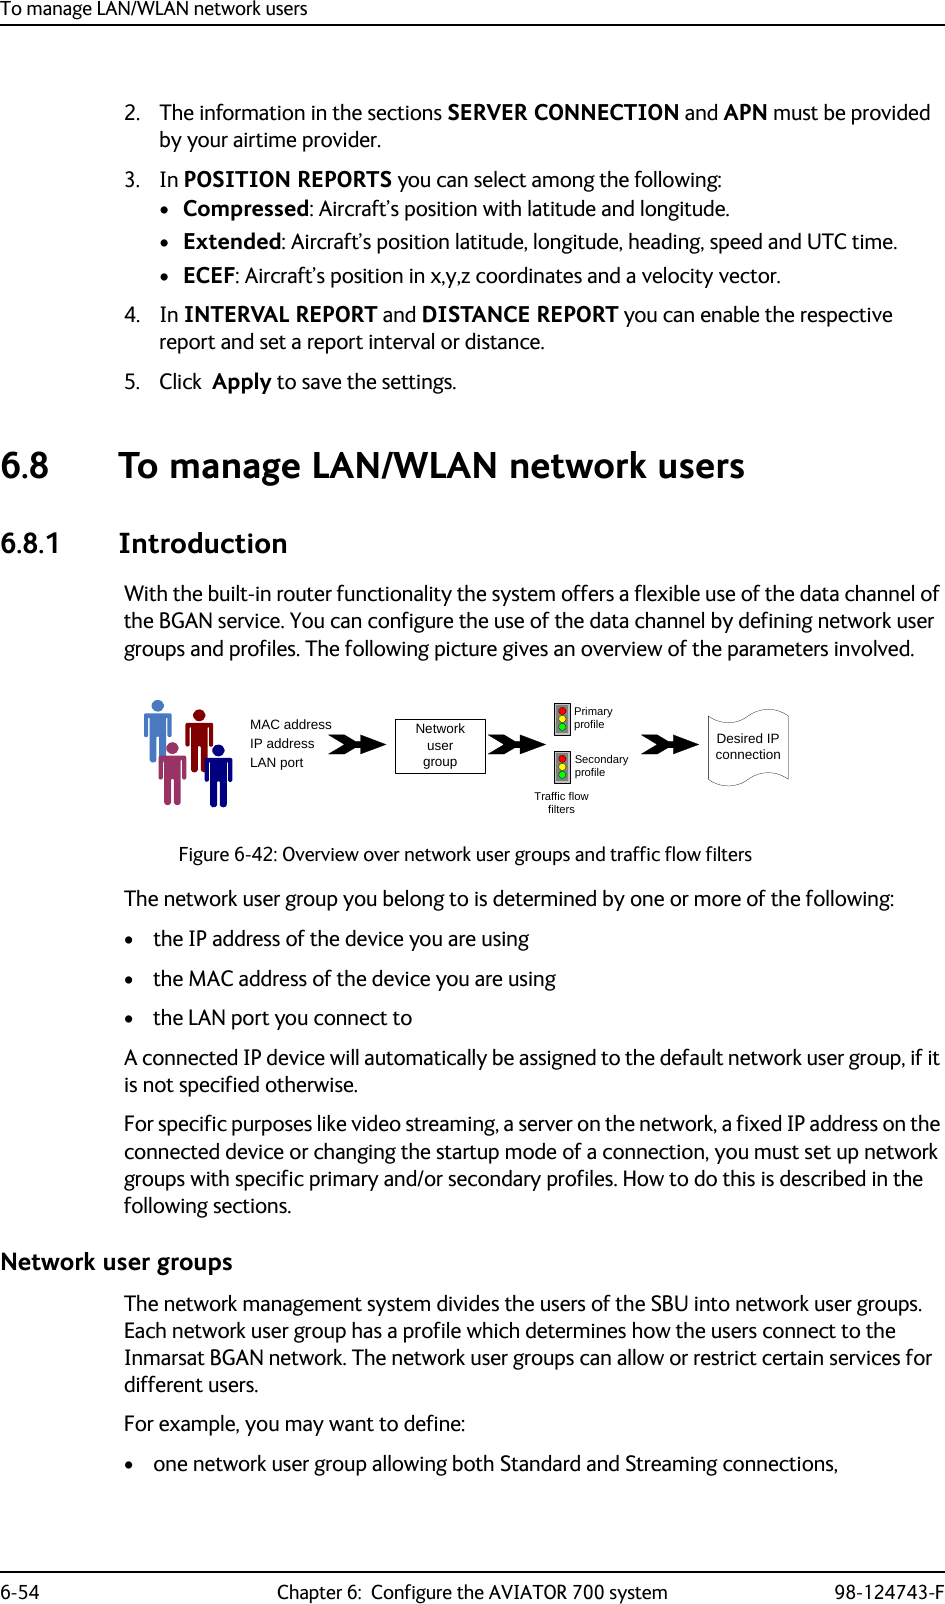 To manage LAN/WLAN network users6-54 Chapter 6:  Configure the AVIATOR 700 system 98-124743-F2. The information in the sections SERVER CONNECTION and APN must be provided by your airtime provider.3. In POSITION REPORTS you can select among the following:•Compressed: Aircraft’s position with latitude and longitude.•Extended: Aircraft’s position latitude, longitude, heading, speed and UTC time.•ECEF: Aircraft’s position in x,y,z coordinates and a velocity vector.4. In INTERVAL REPORT and DISTANCE REPORT you can enable the respective report and set a report interval or distance.5. Click  Apply to save the settings.  6.8 To manage LAN/WLAN network users6.8.1 IntroductionWith the built-in router functionality the system offers a flexible use of the data channel of the BGAN service. You can configure the use of the data channel by defining network user groups and profiles. The following picture gives an overview of the parameters involved.Figure 6-42: Overview over network user groups and traffic flow filtersThe network user group you belong to is determined by one or more of the following:• the IP address of the device you are using• the MAC address of the device you are using• the LAN port you connect toA connected IP device will automatically be assigned to the default network user group, if it is not specified otherwise.For specific purposes like video streaming, a server on the network, a fixed IP address on the connected device or changing the startup mode of a connection, you must set up network groups with specific primary and/or secondary profiles. How to do this is described in the following sections.Network user groupsThe network management system divides the users of the SBU into network user groups. Each network user group has a profile which determines how the users connect to the Inmarsat BGAN network. The network user groups can allow or restrict certain services for different users.For example, you may want to define:• one network user group allowing both Standard and Streaming connections,MAC addressIP addressLAN portNetwork user groupPrimary profileSecondary profileTraffic flowfiltersDesired IP connection